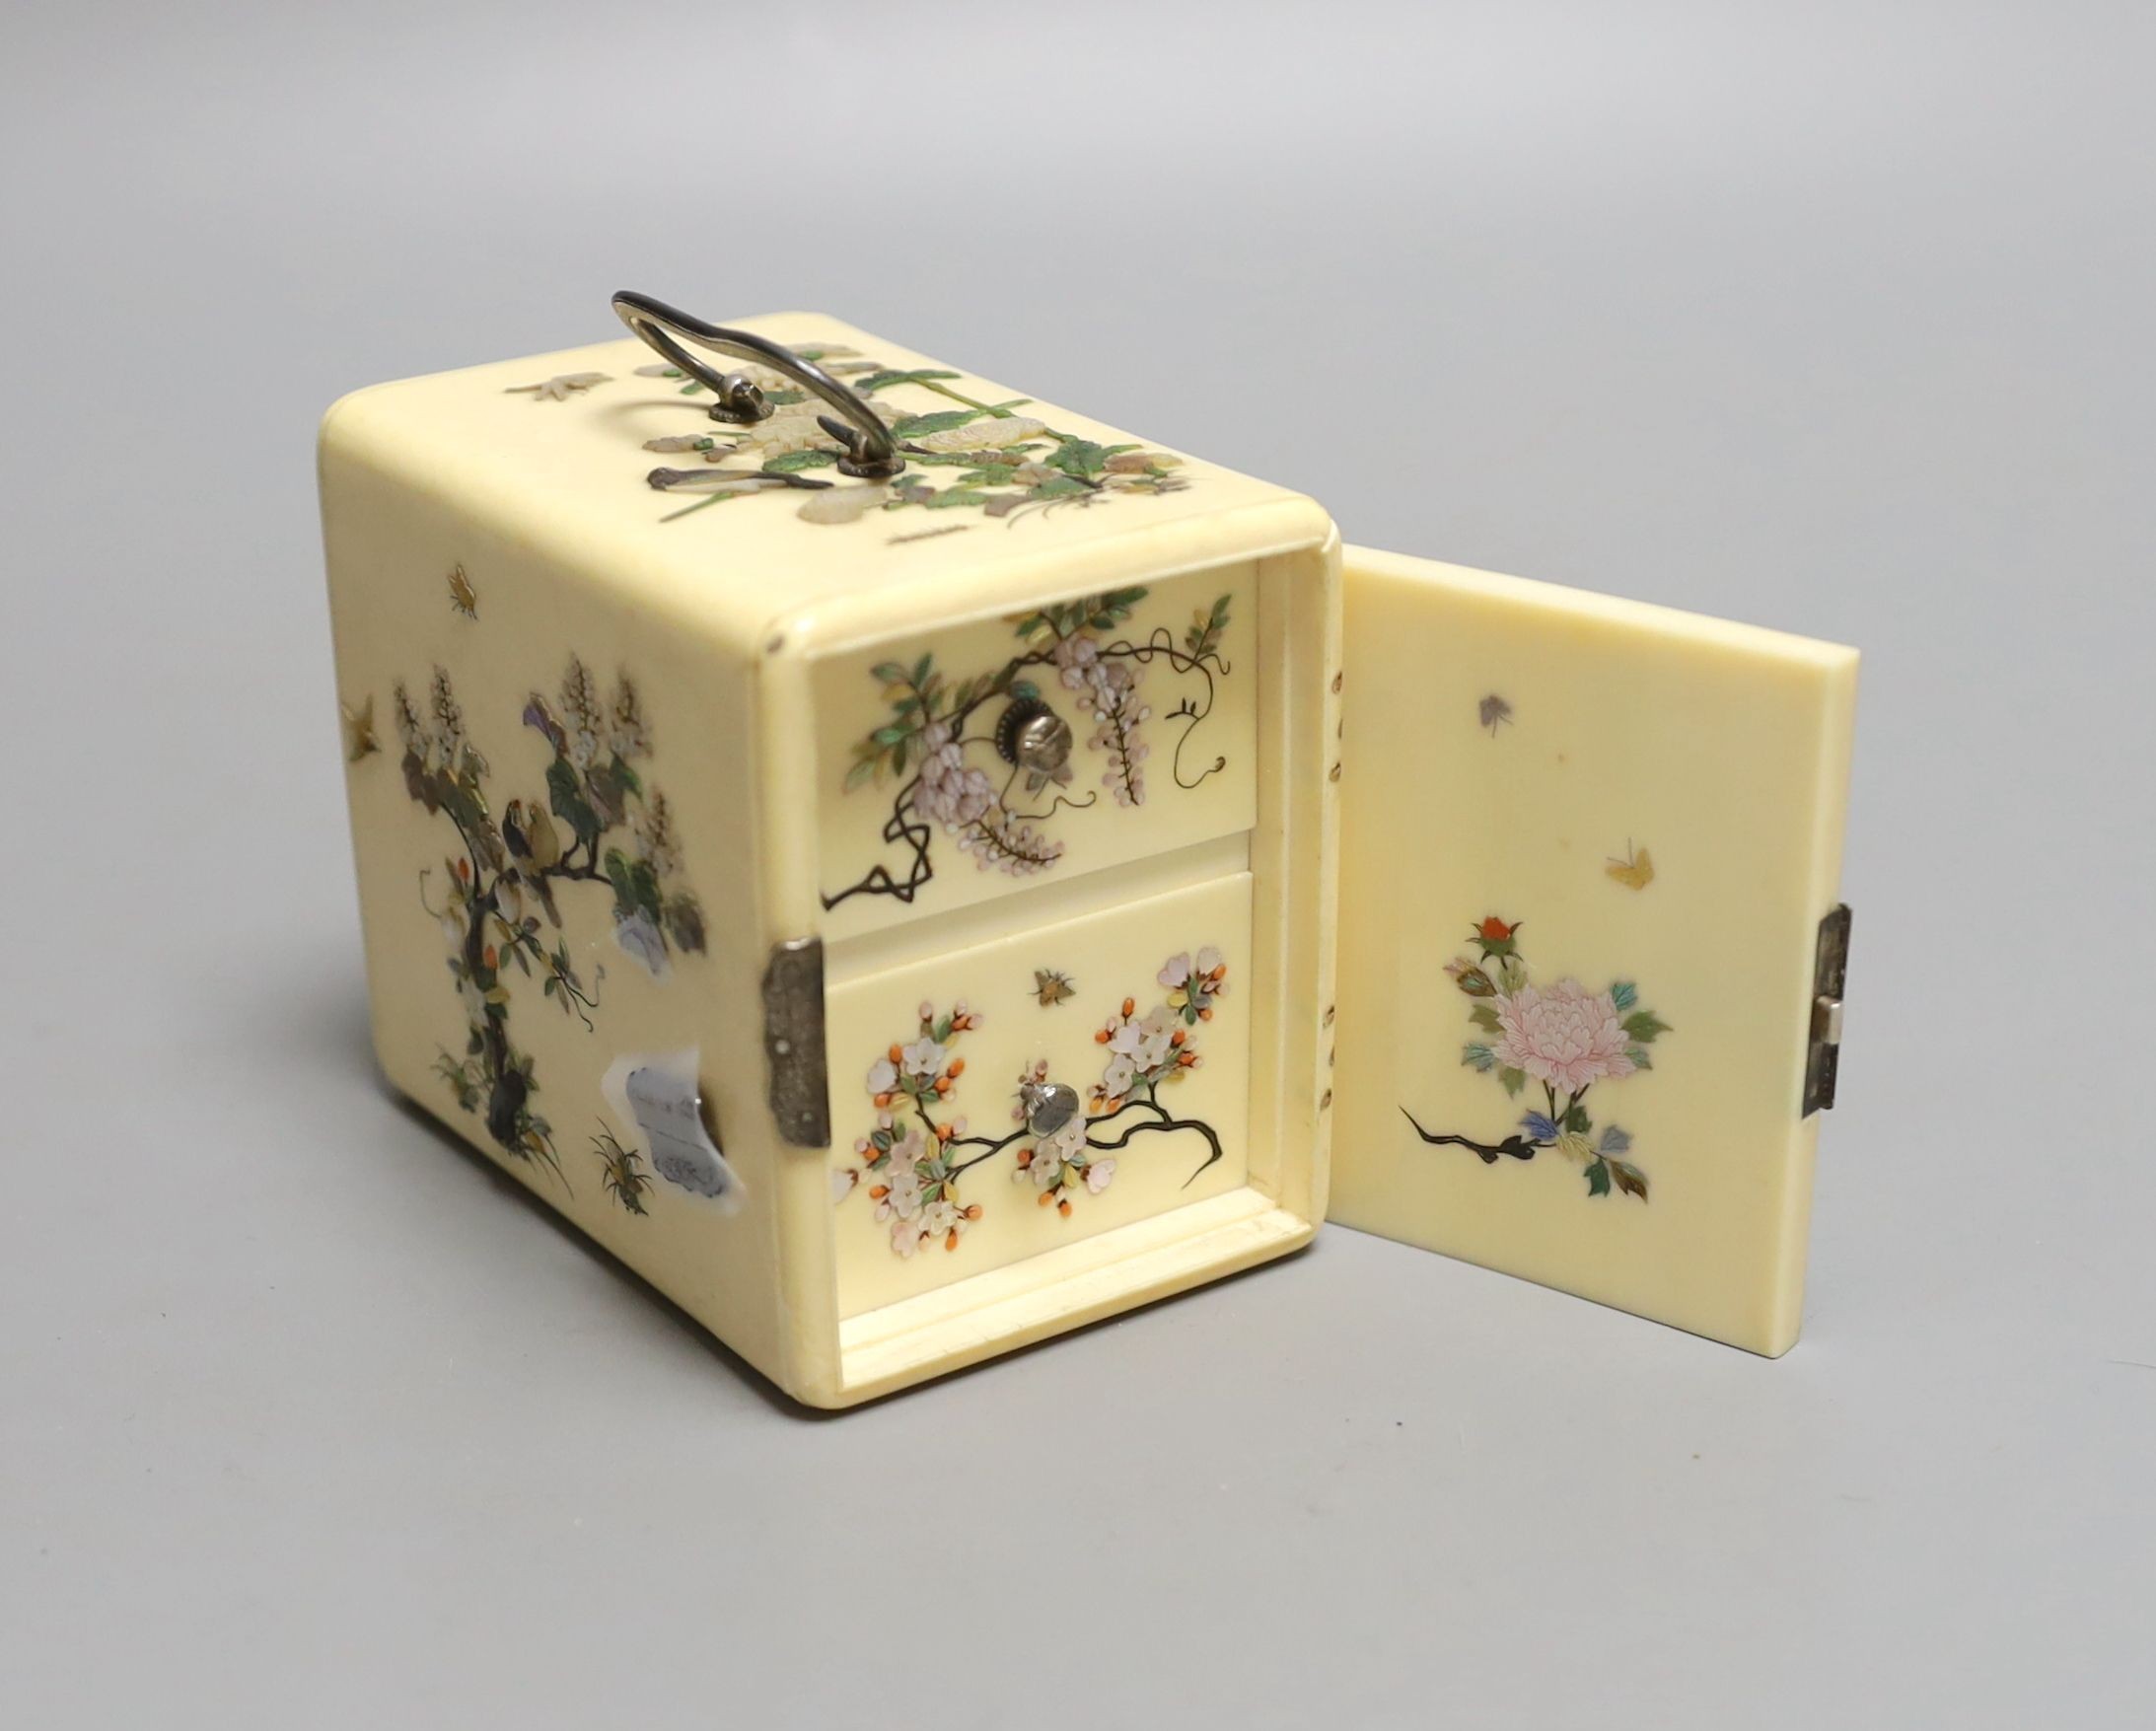 A Japanese Shibayama style ivory kodansu (table cabinet), Meiji period, with white metal lock, hinges and handles, 7cms high x 10 cms deep.